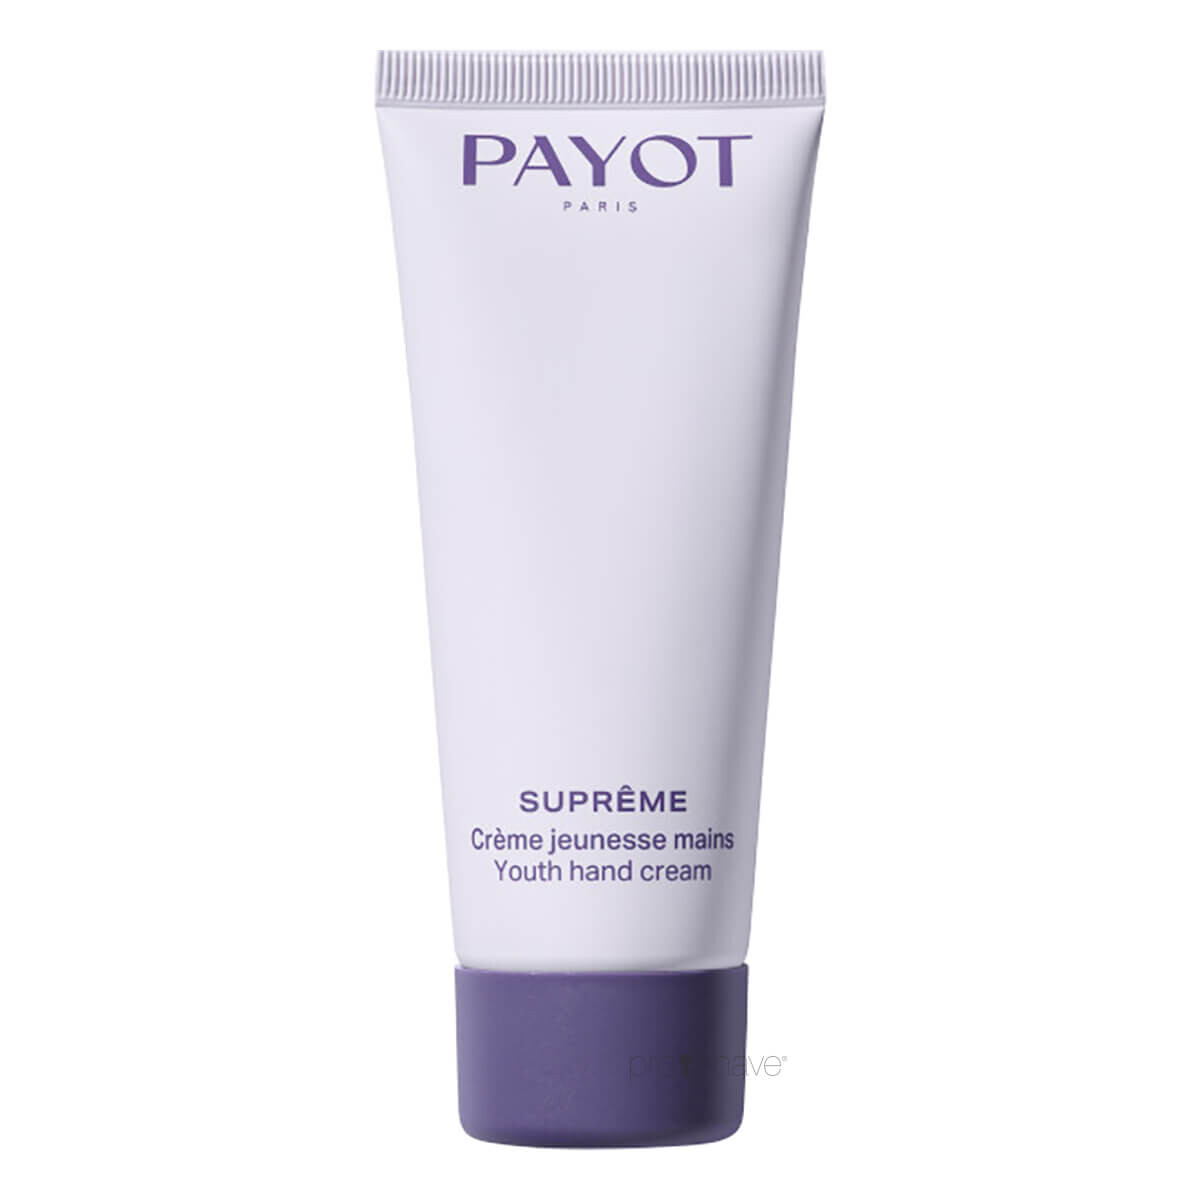 15: Payot SuprÃªme Youth Hand Cream, 50 ml.